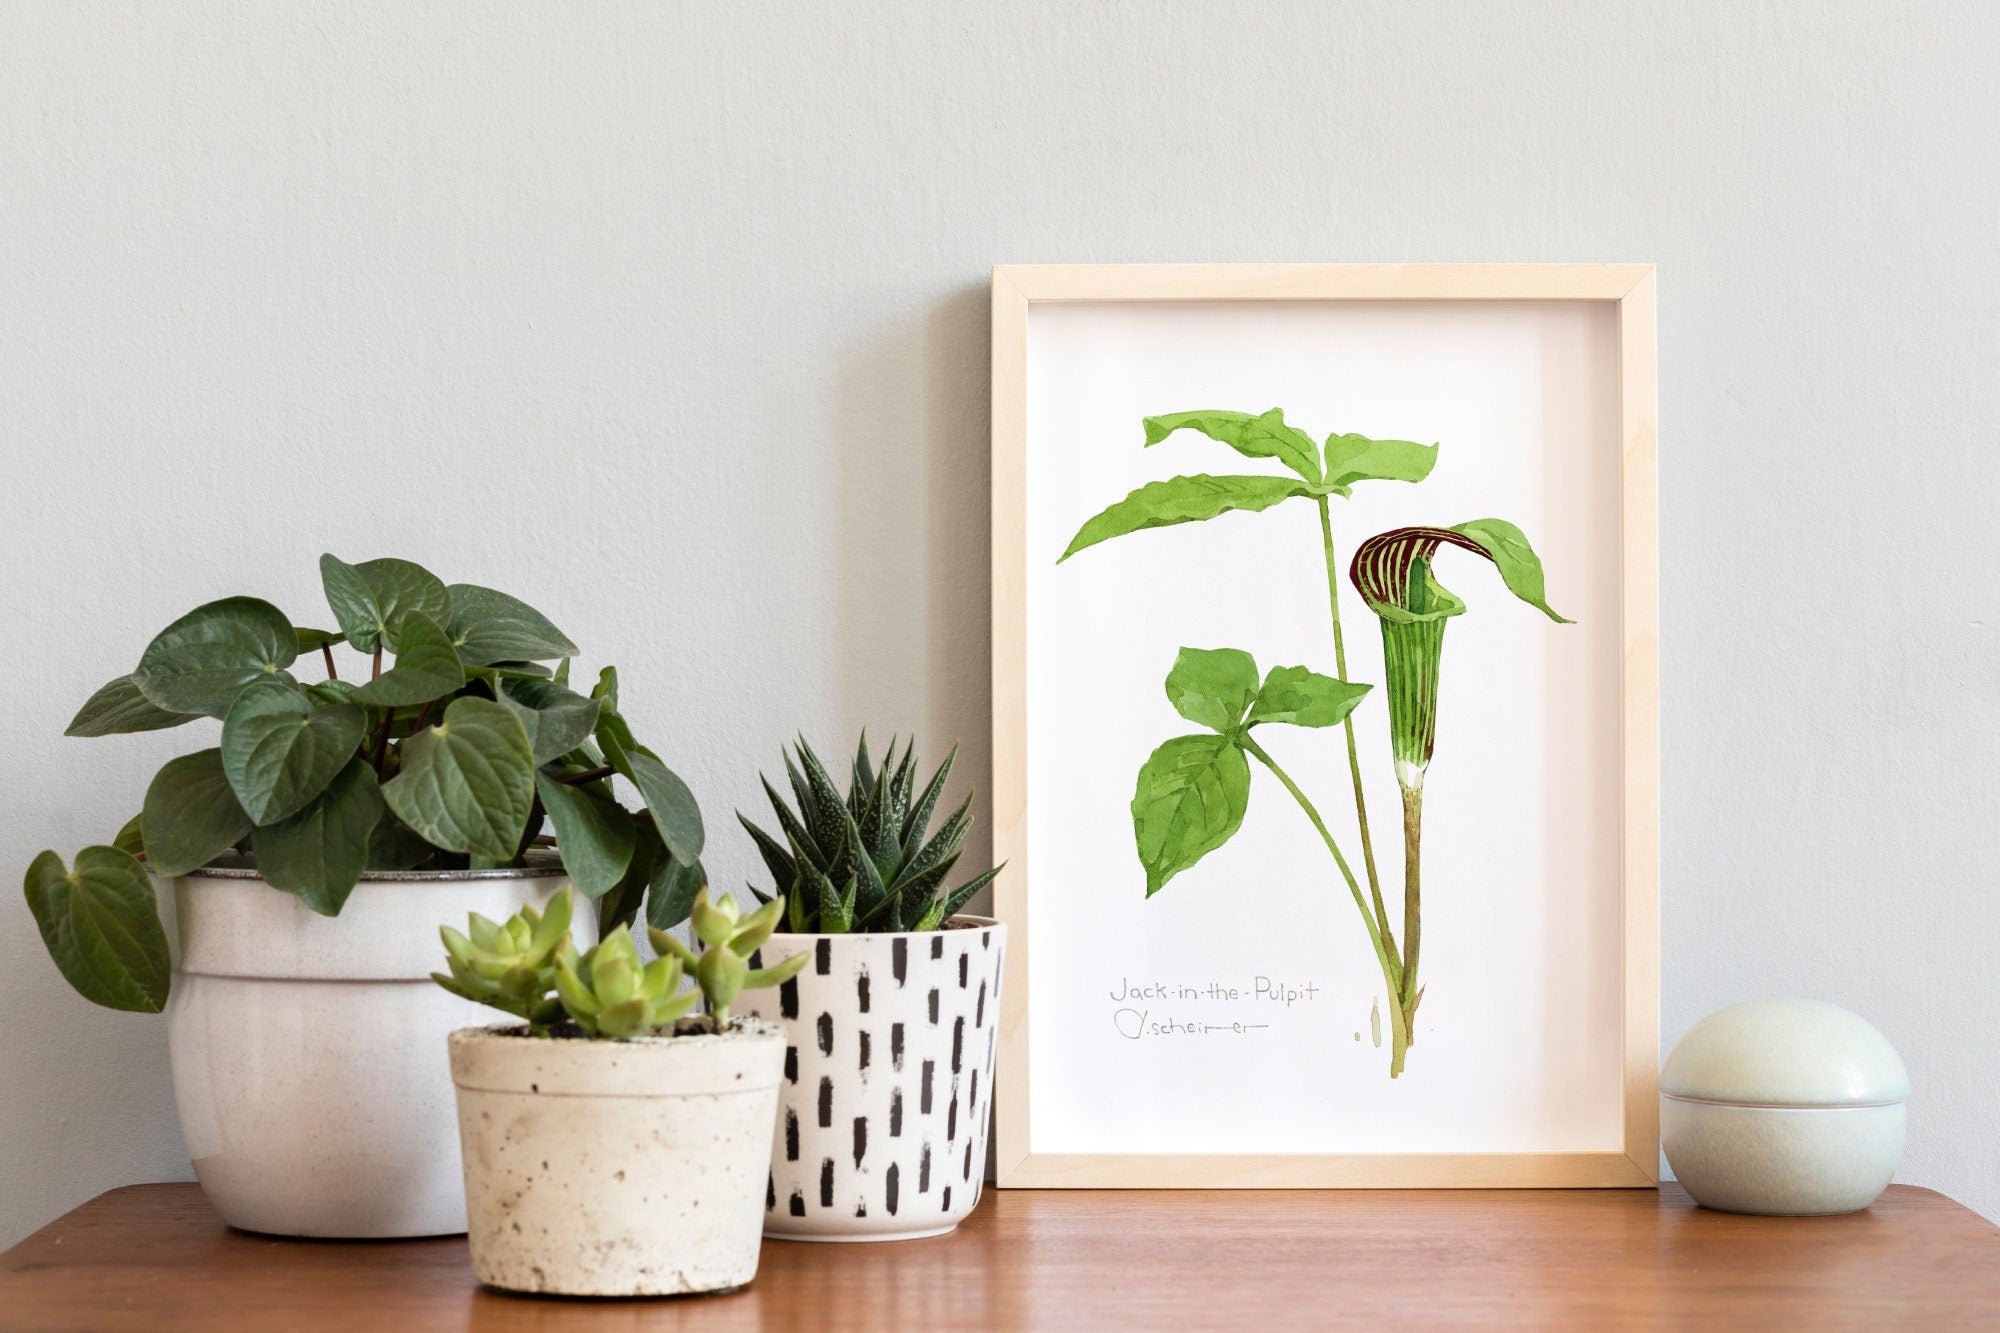 Jack in the Pulpit Watercolor Botanical Art Print, Woodland Plant Wall Decor